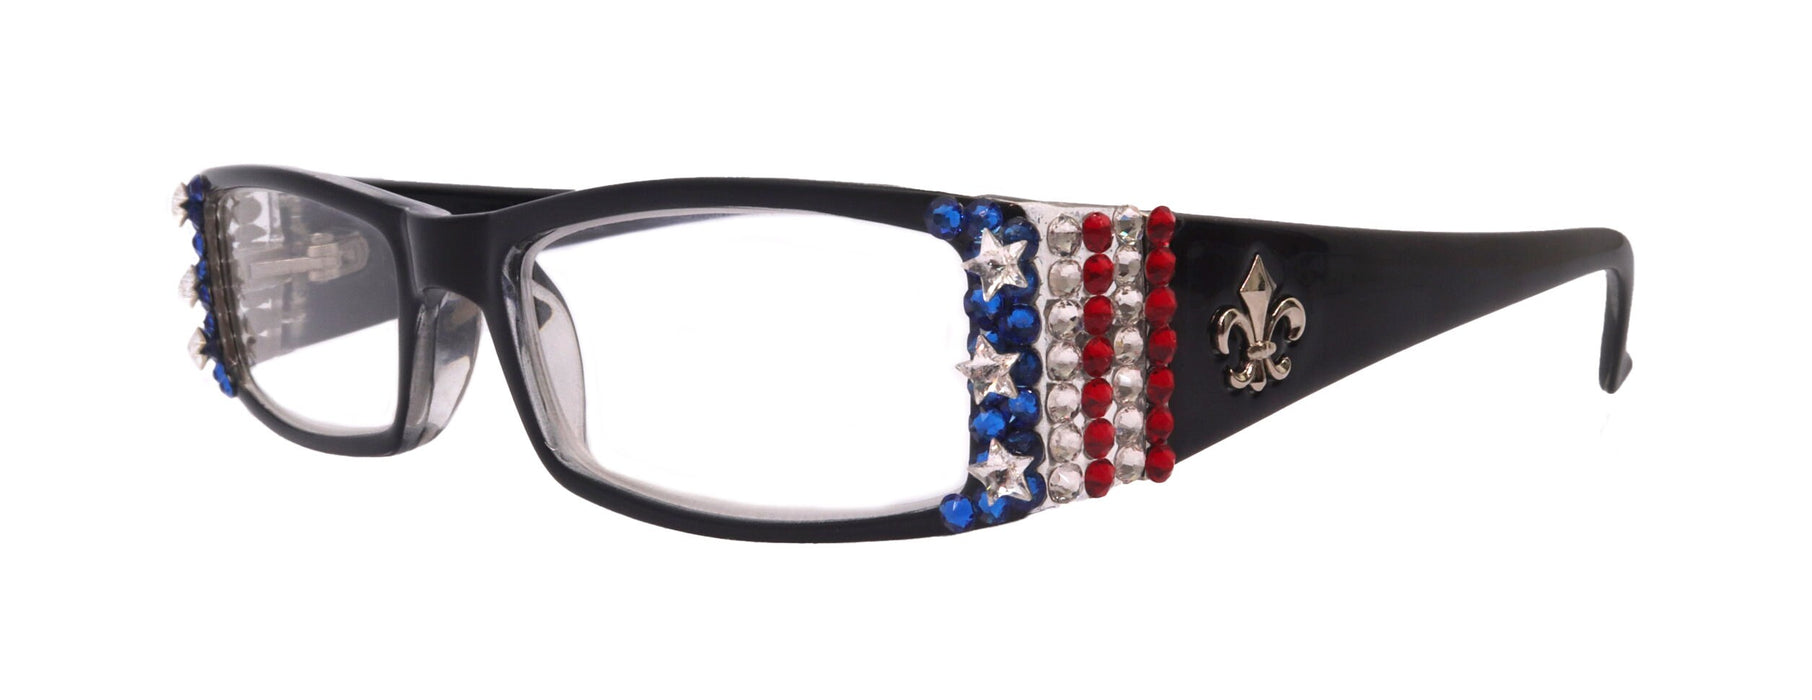 The French, (Bling) (Fleur De Lis) Women Reading Glasses W Genuine European Crystals (Black) NY Fifth Avenue